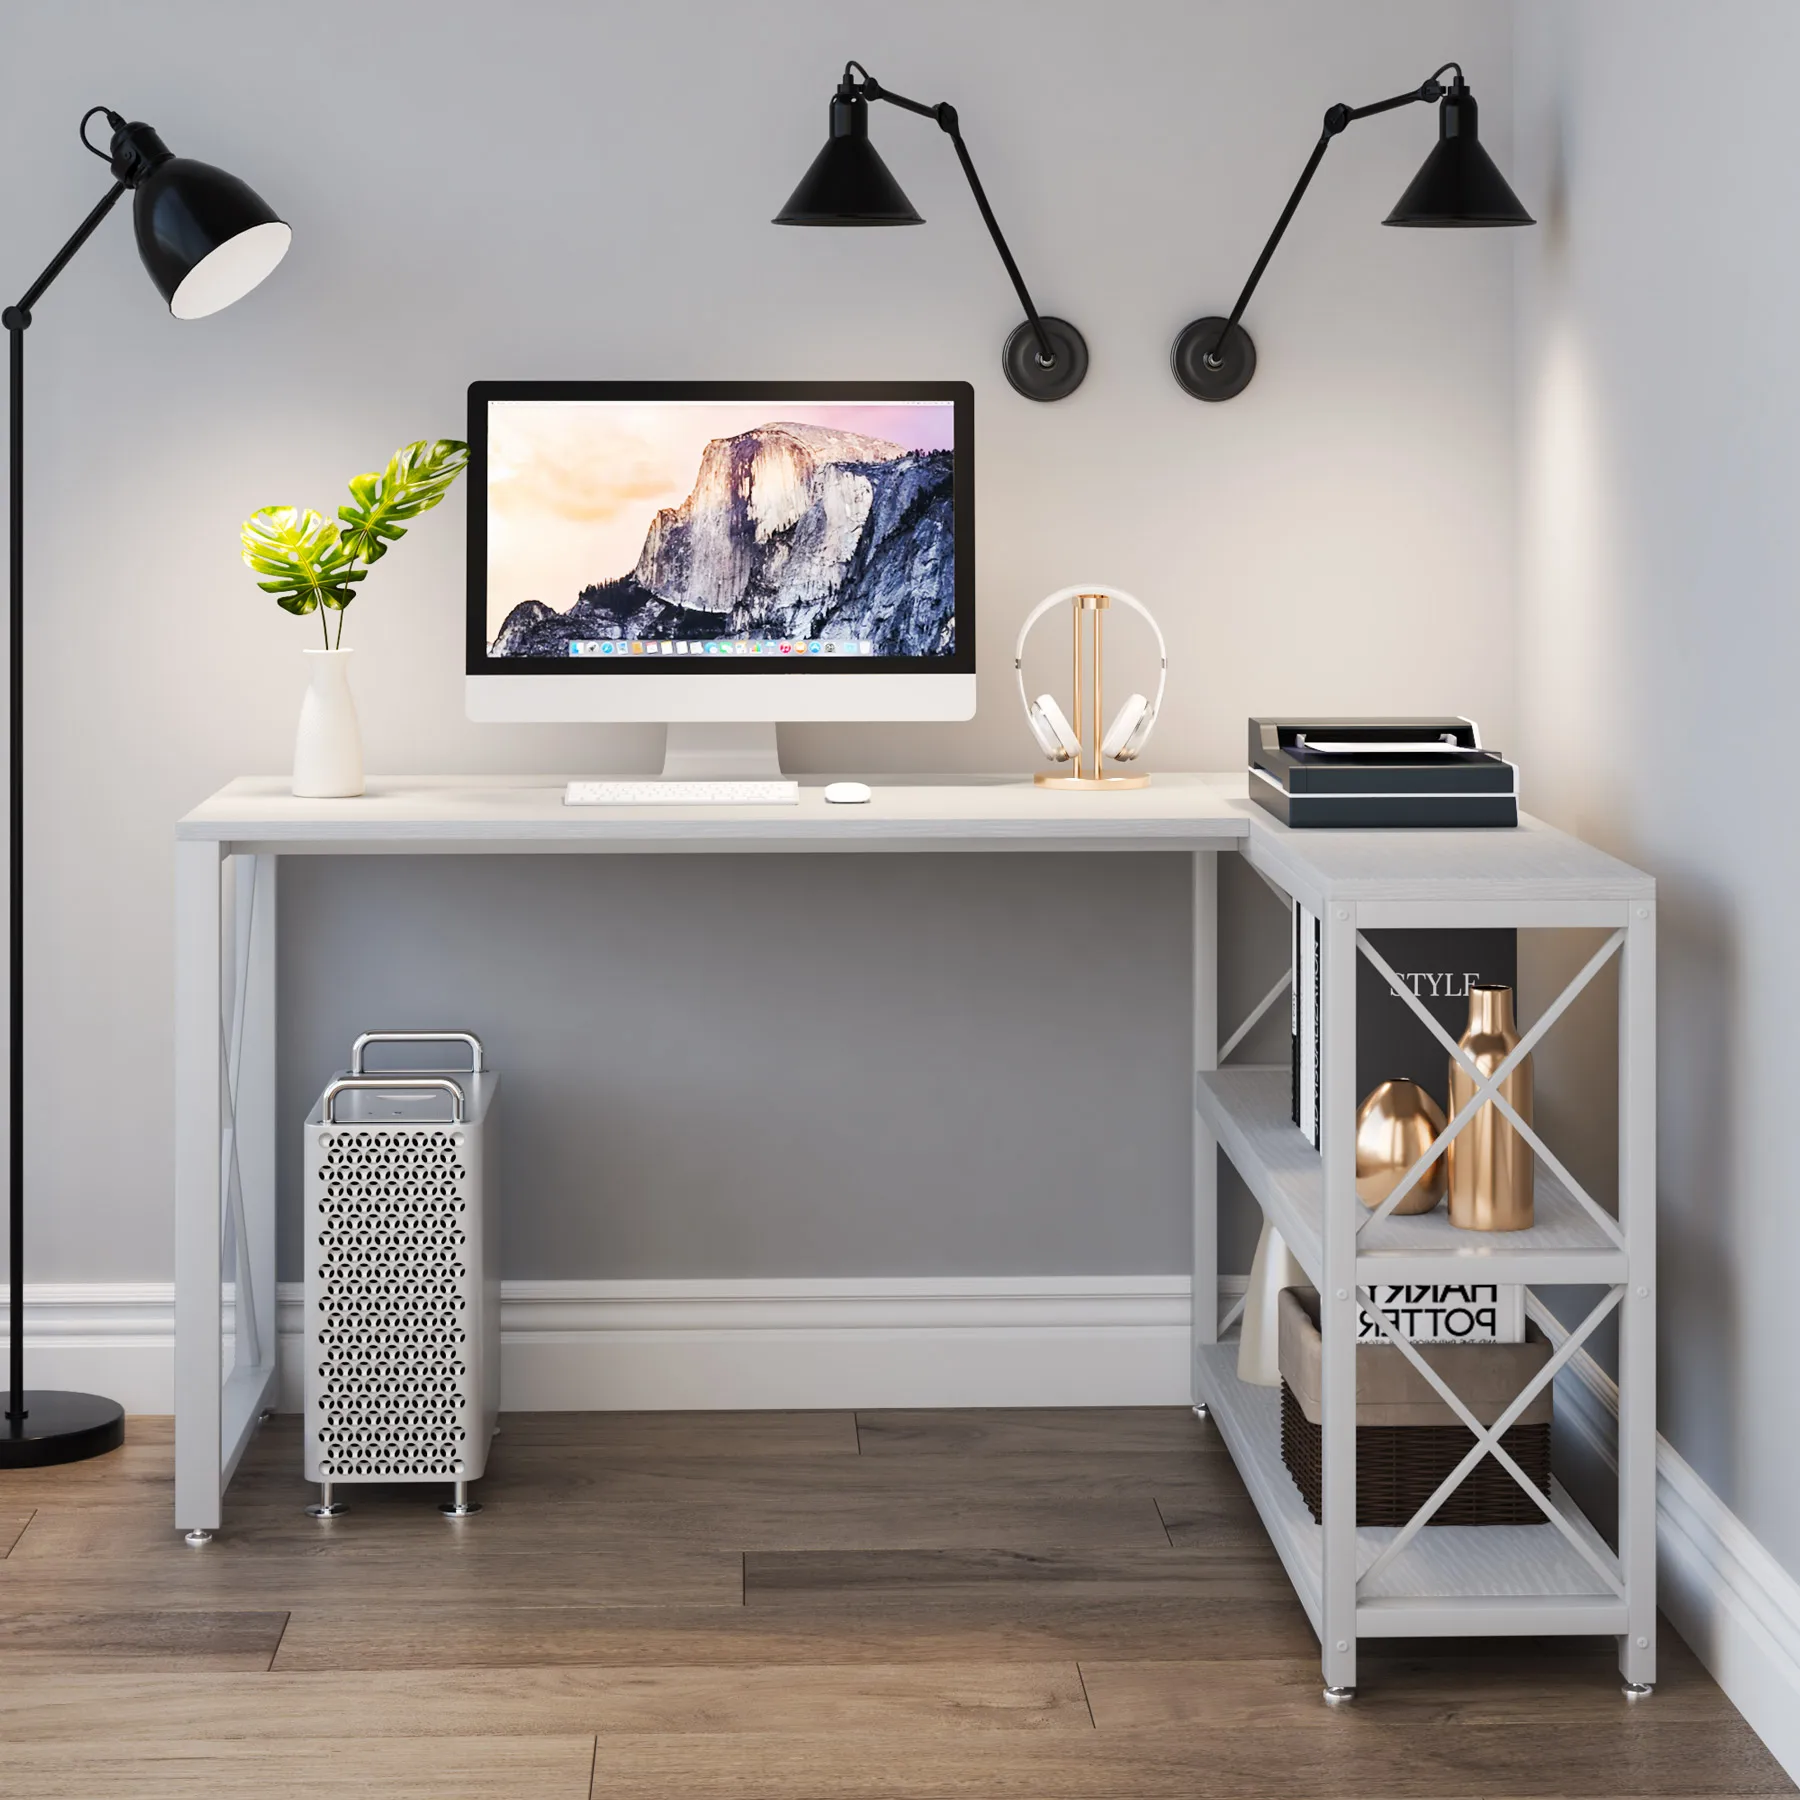 Best Working Ready Made White Table Computer Desks For Small Spaces With Storage